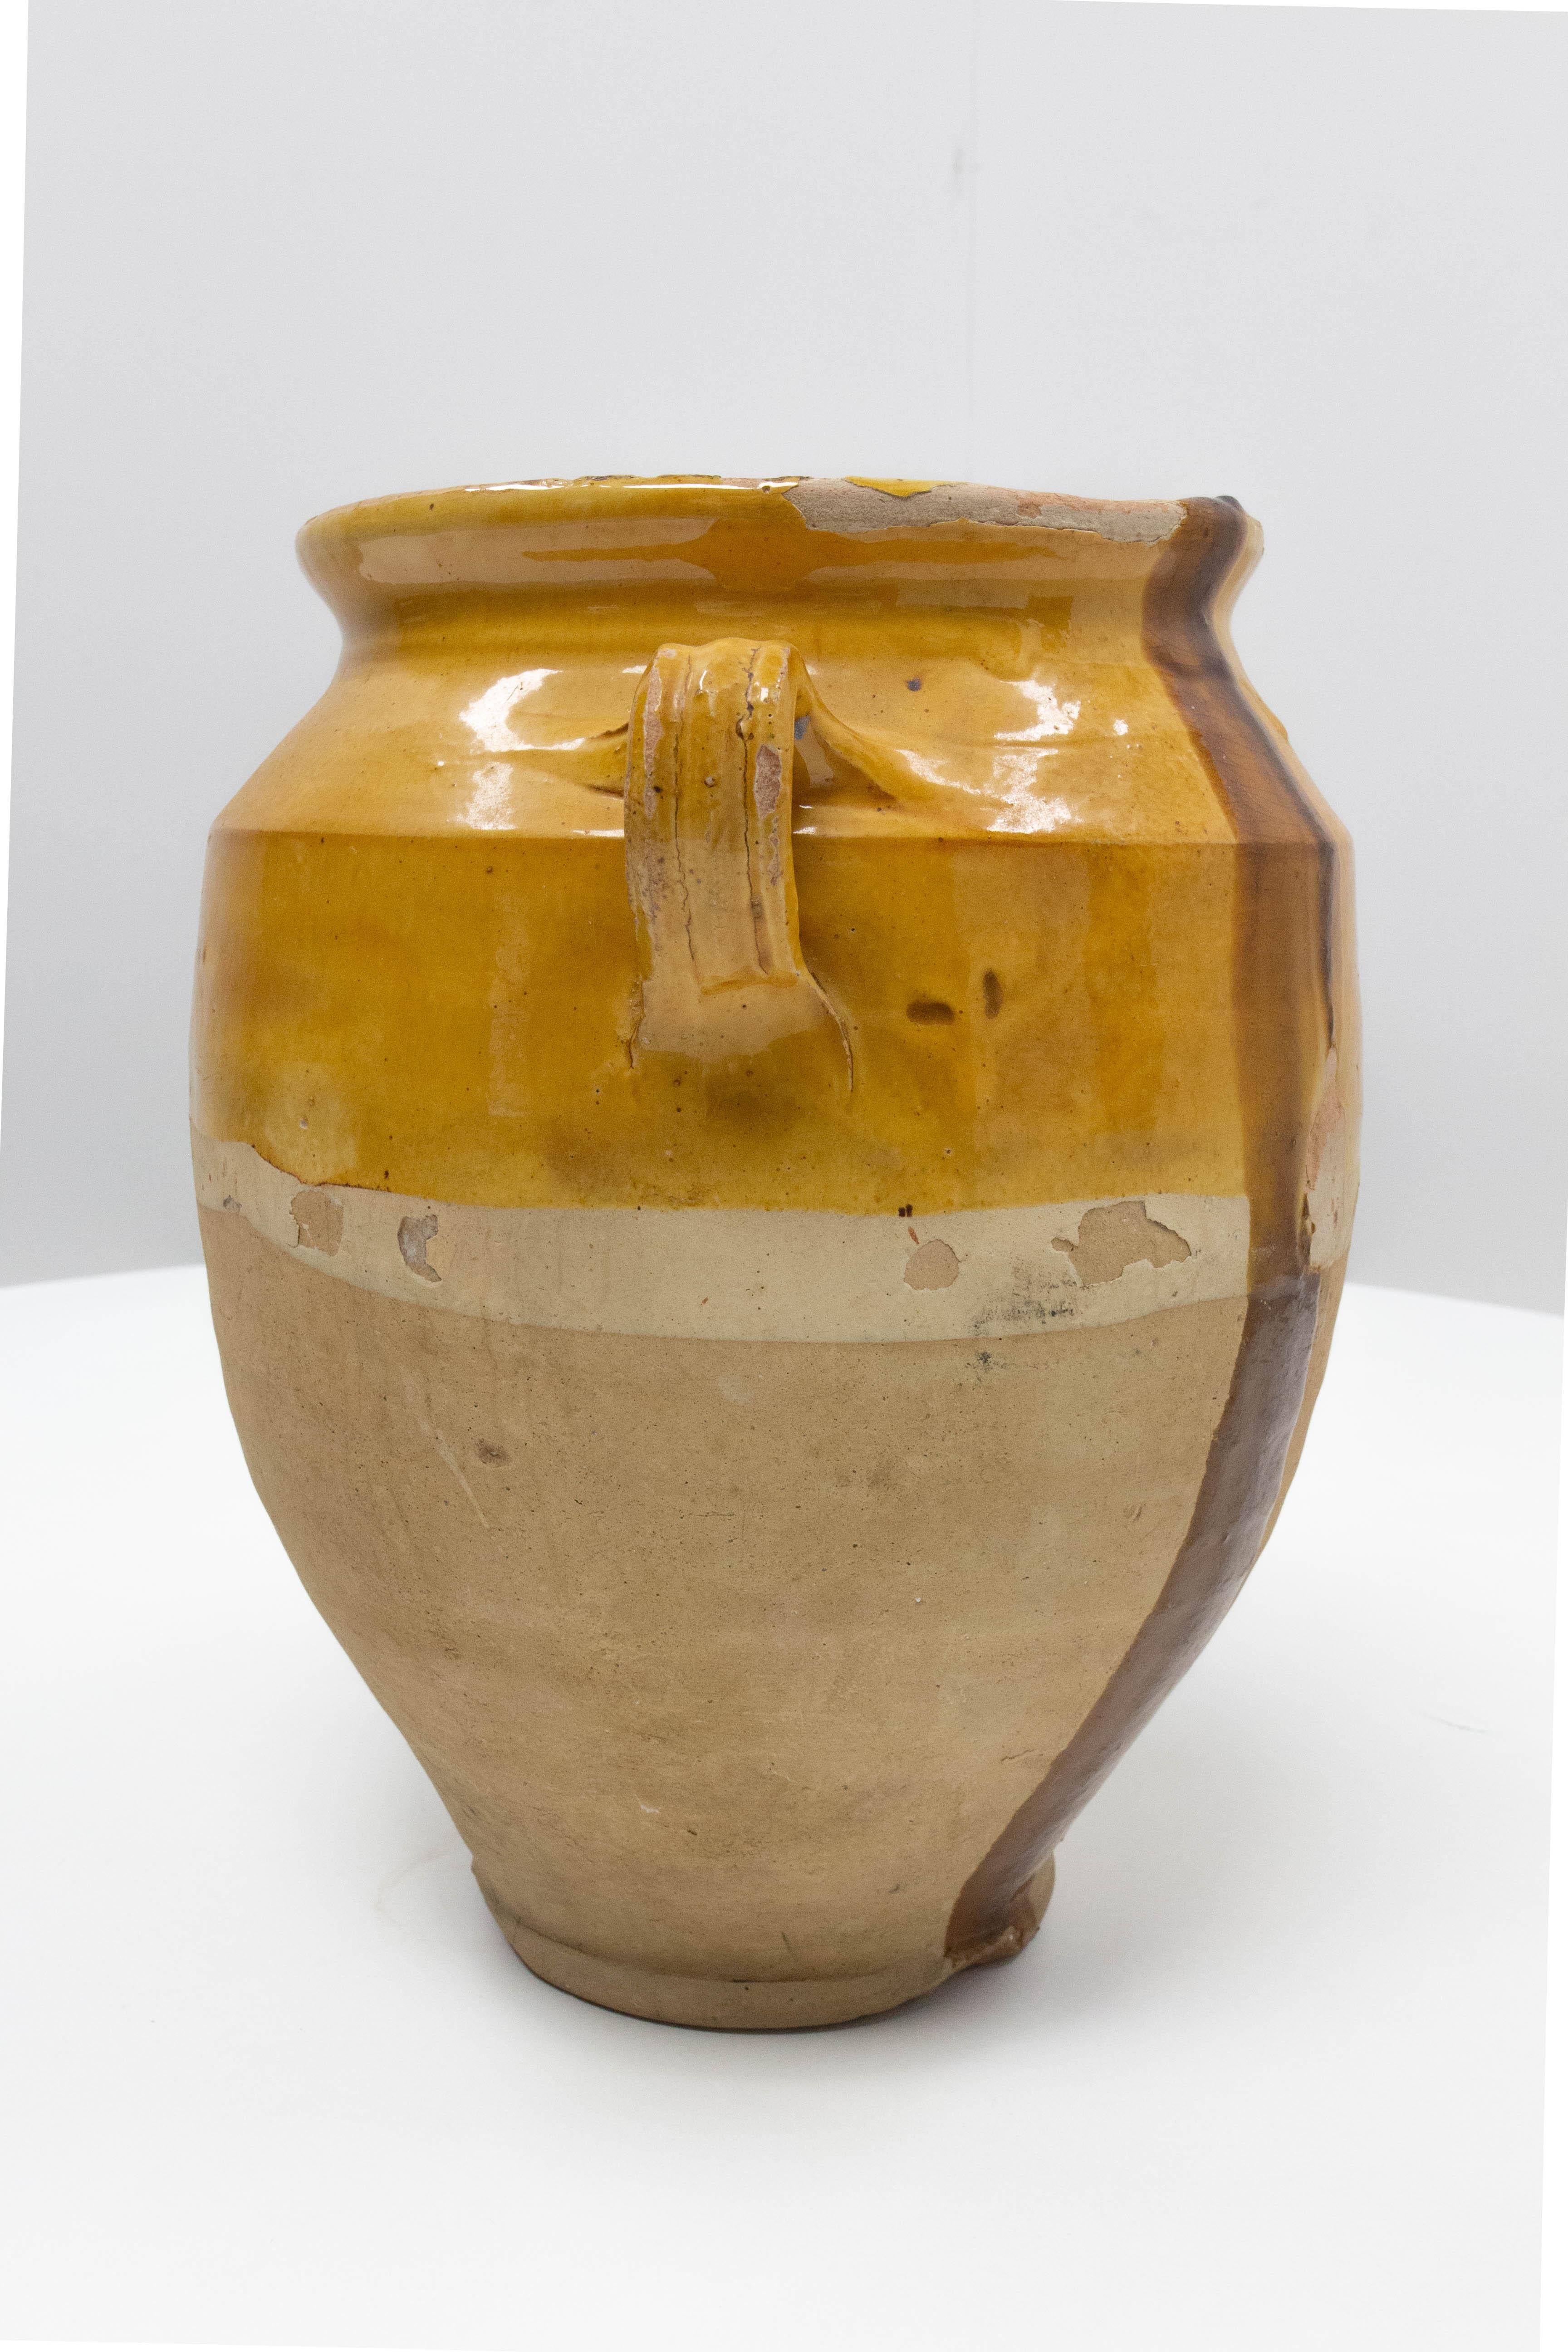 French Provincial French Terracotta Confit Pot Yellow Glaze, Late 19th Century